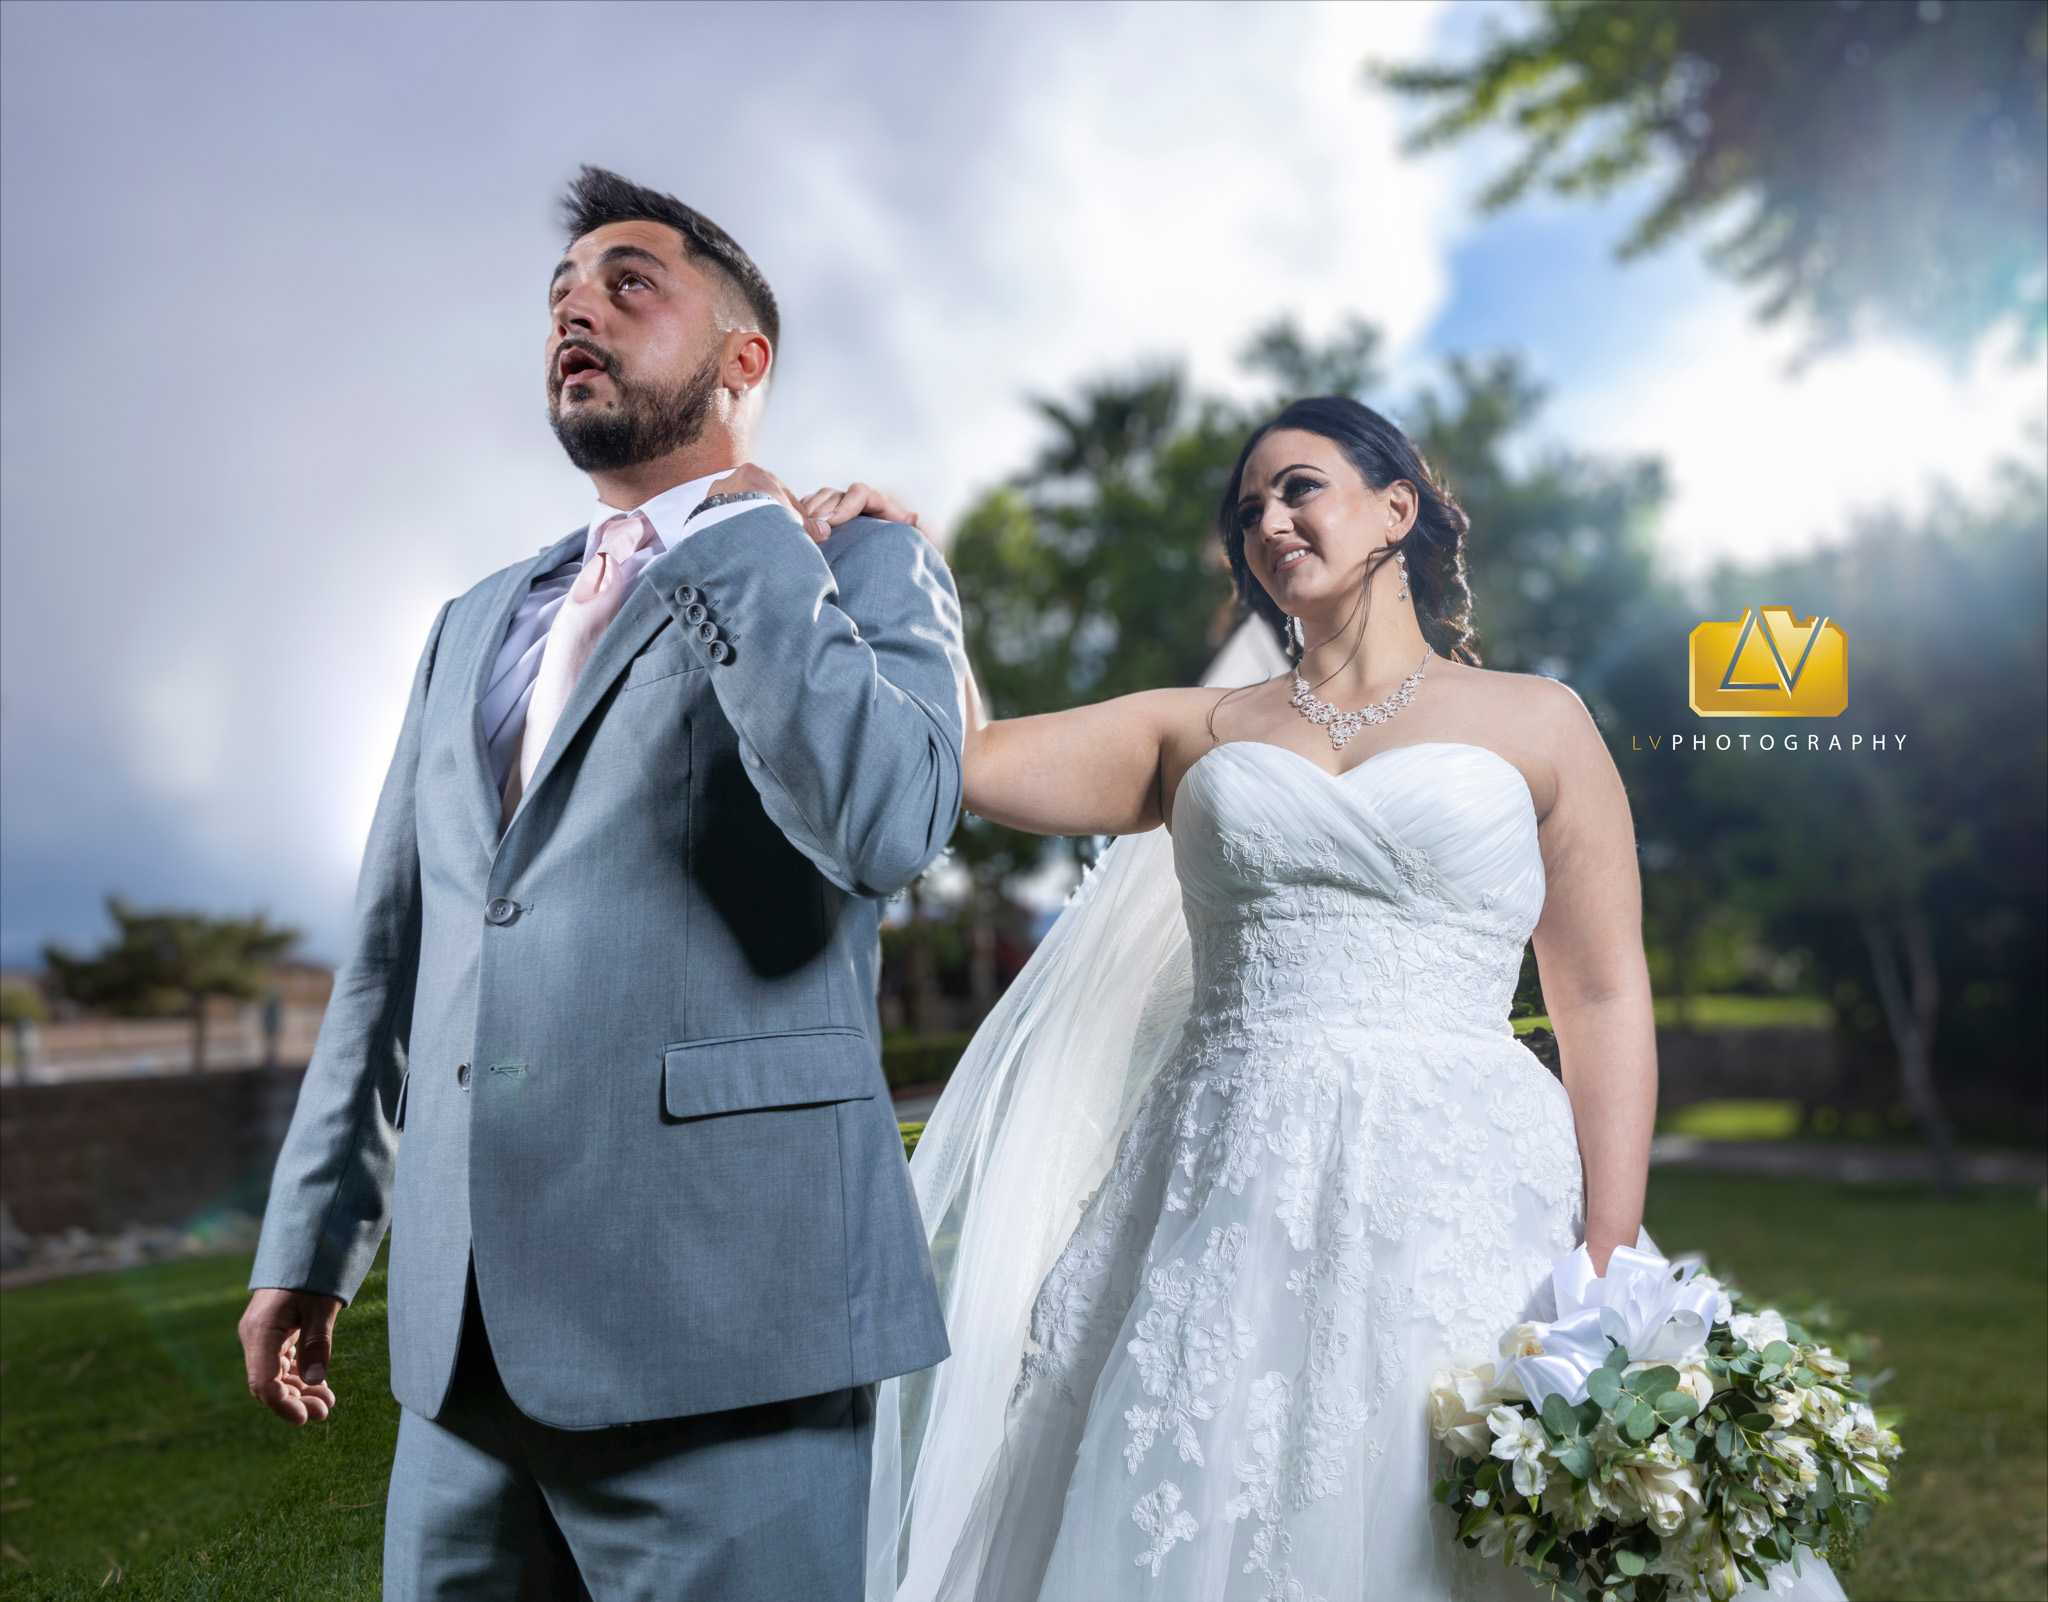 Top Rated Wedding Photographer In Las Vegas NV